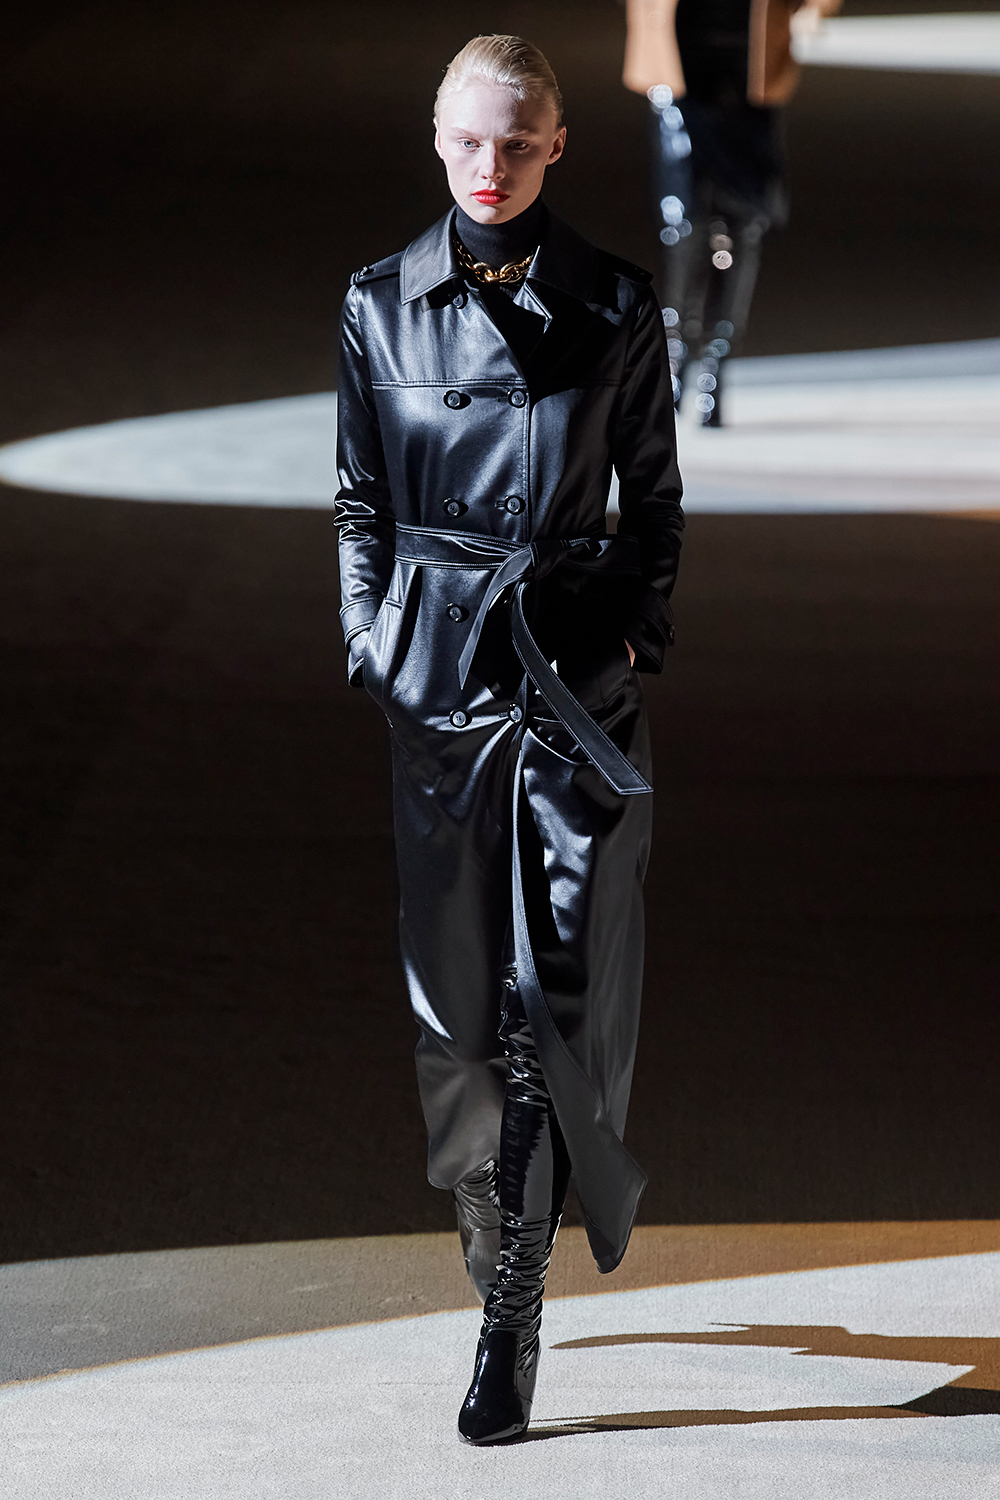 BACK TO BLACK: THE GLOOMY FASHION SHOWS OF THIS PFW | | The Blonde Salad